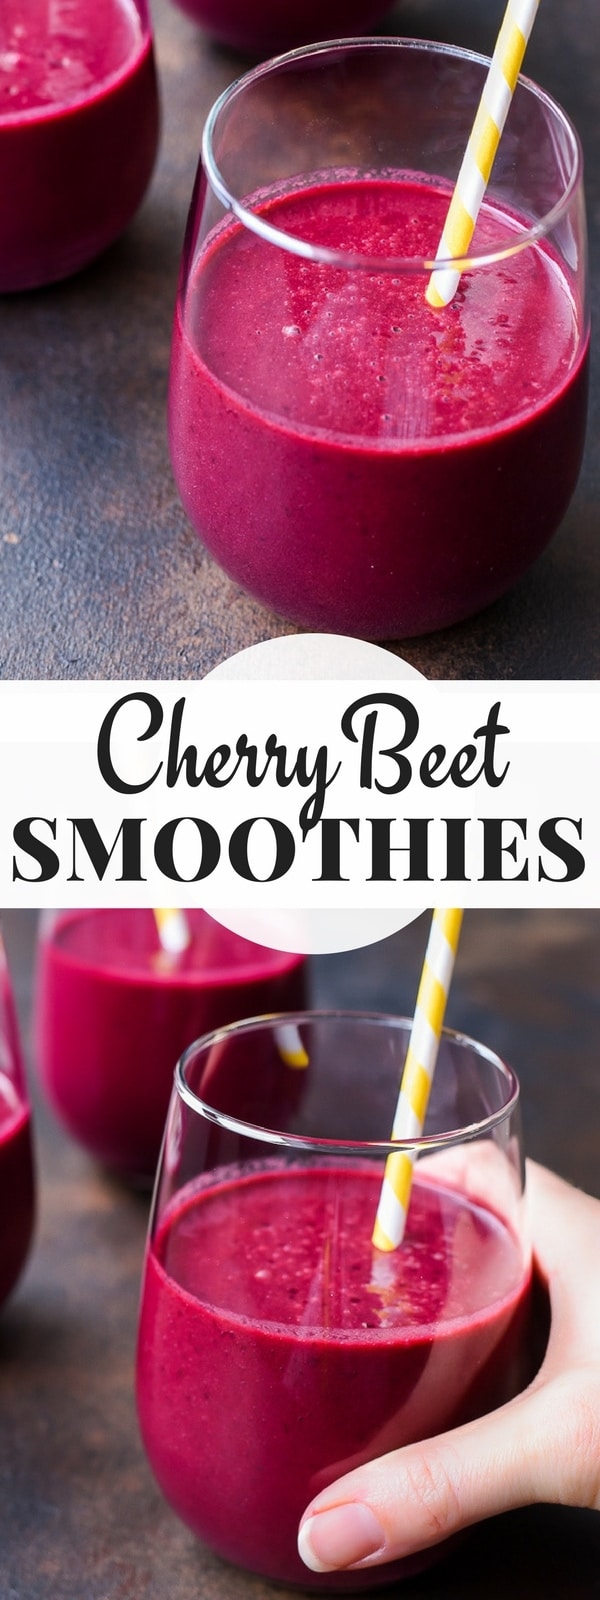 This Cherry Beet Smoothie Recipe is an absolutely delicious way to jump start your day. 